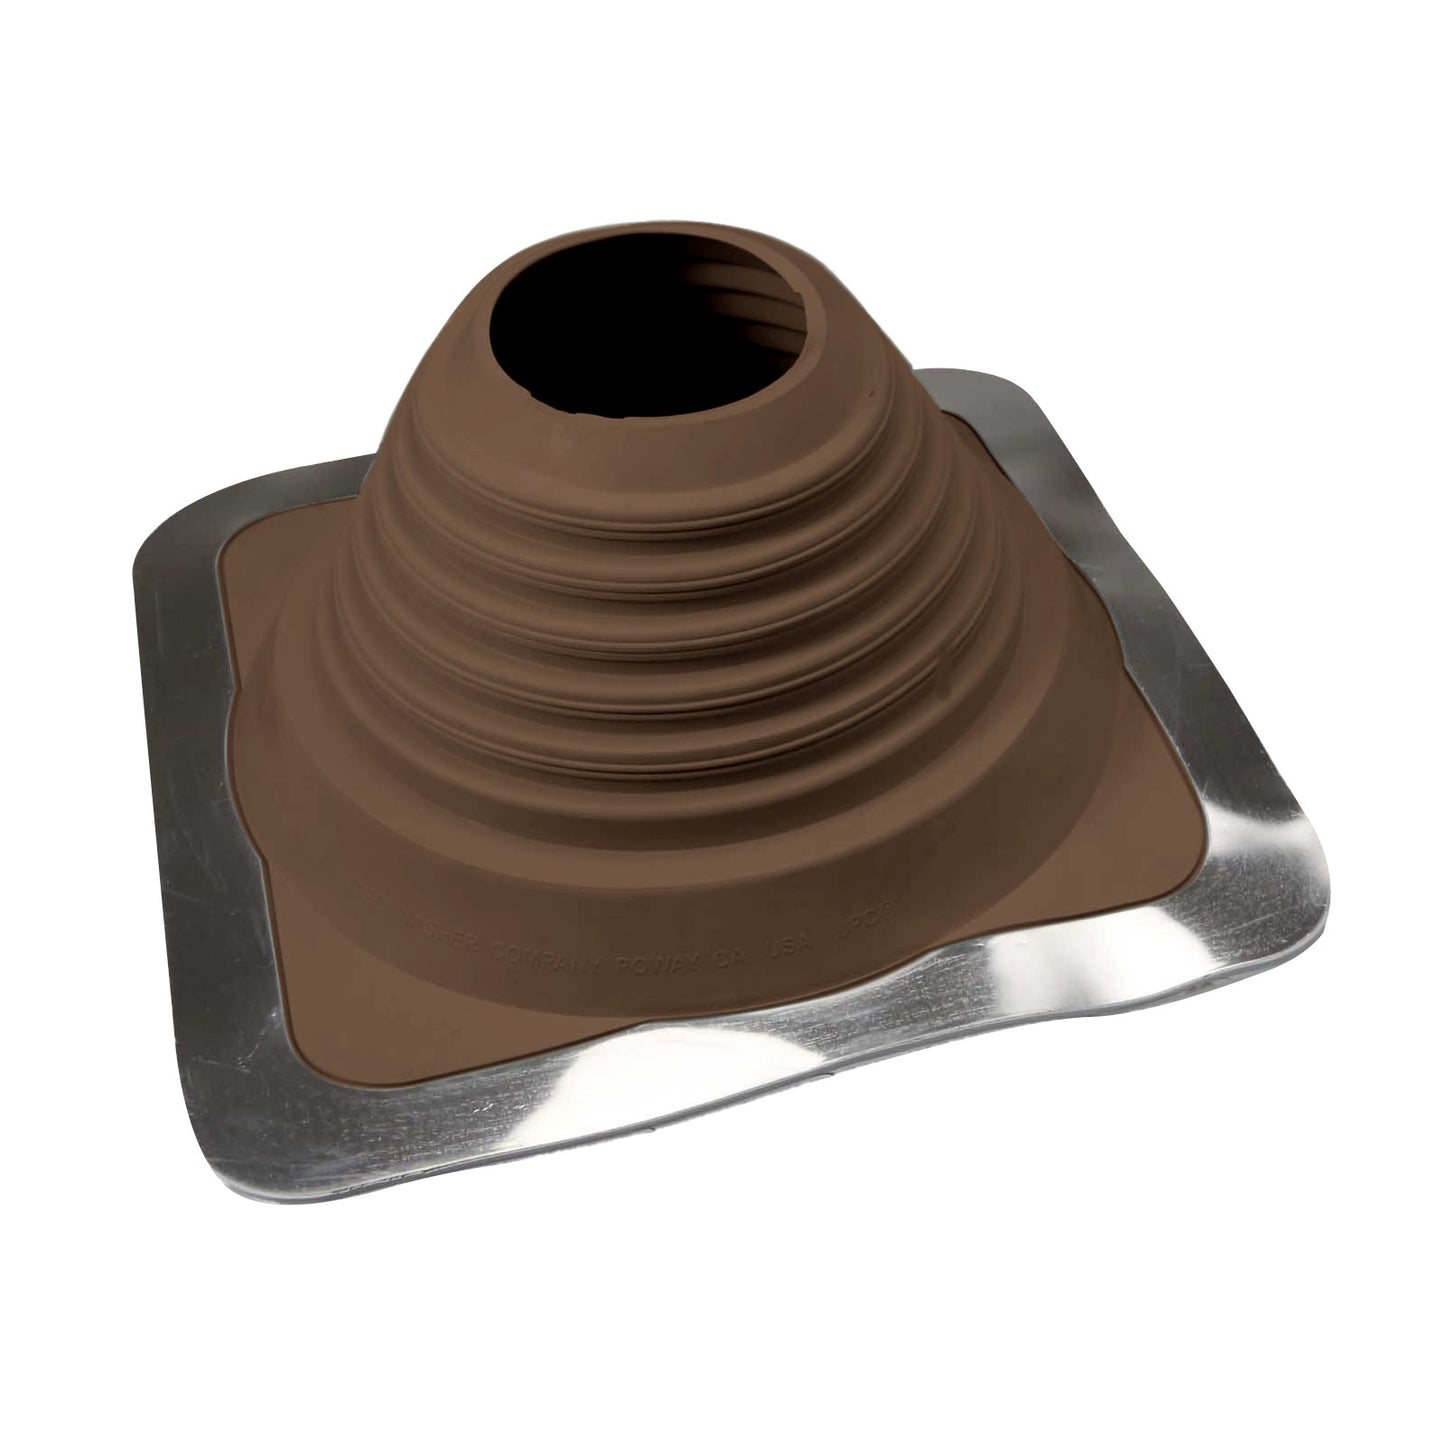 #5 Roofjack Square EPDM Pipe Flashing Boot Brown